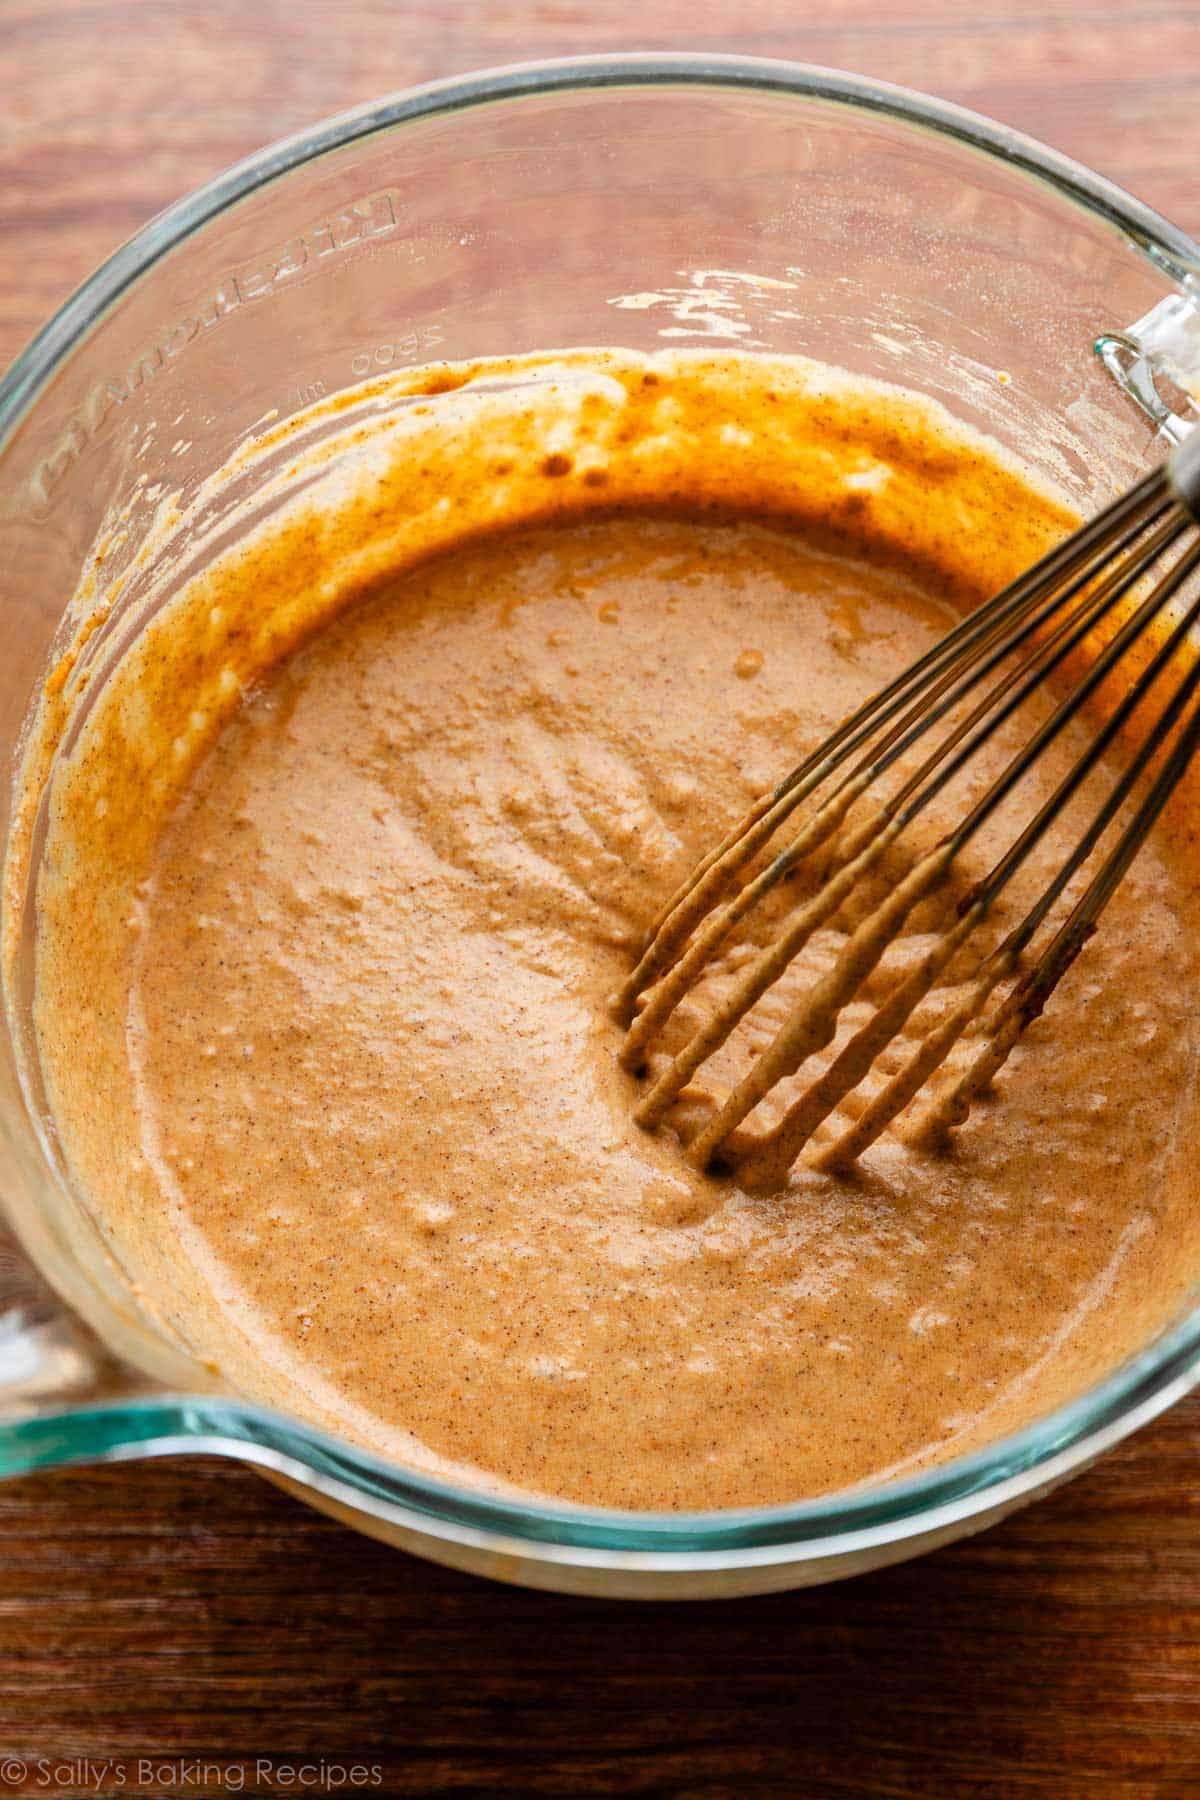 pumpkin dough in glass bowl with whisk on wooden surface.